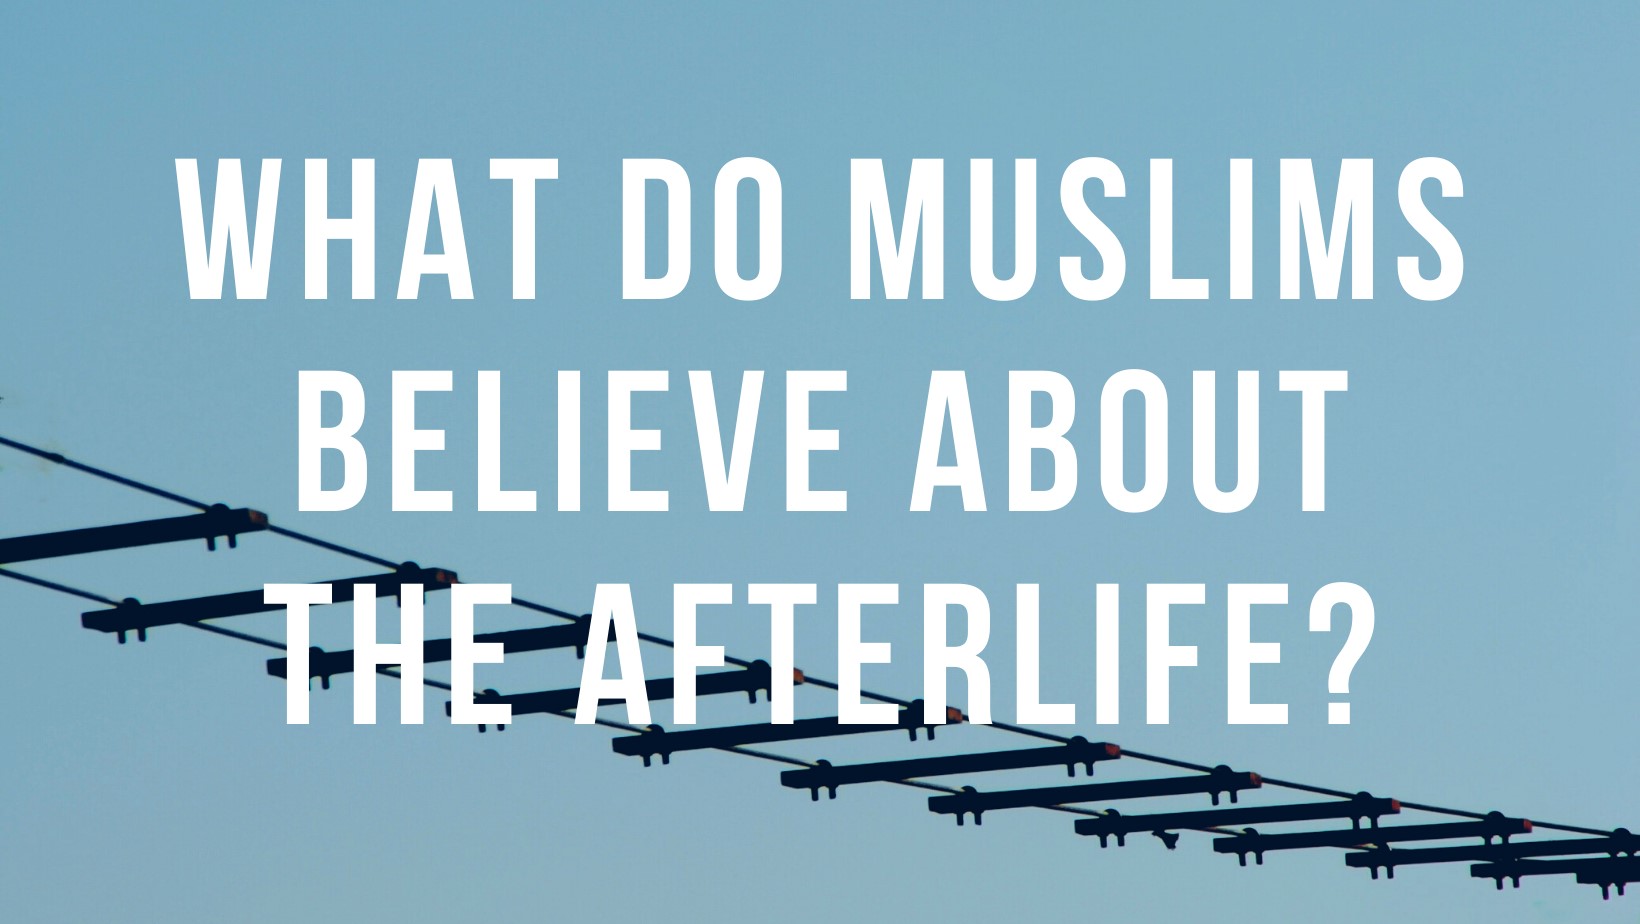 What do Muslims believe about the afterlife?